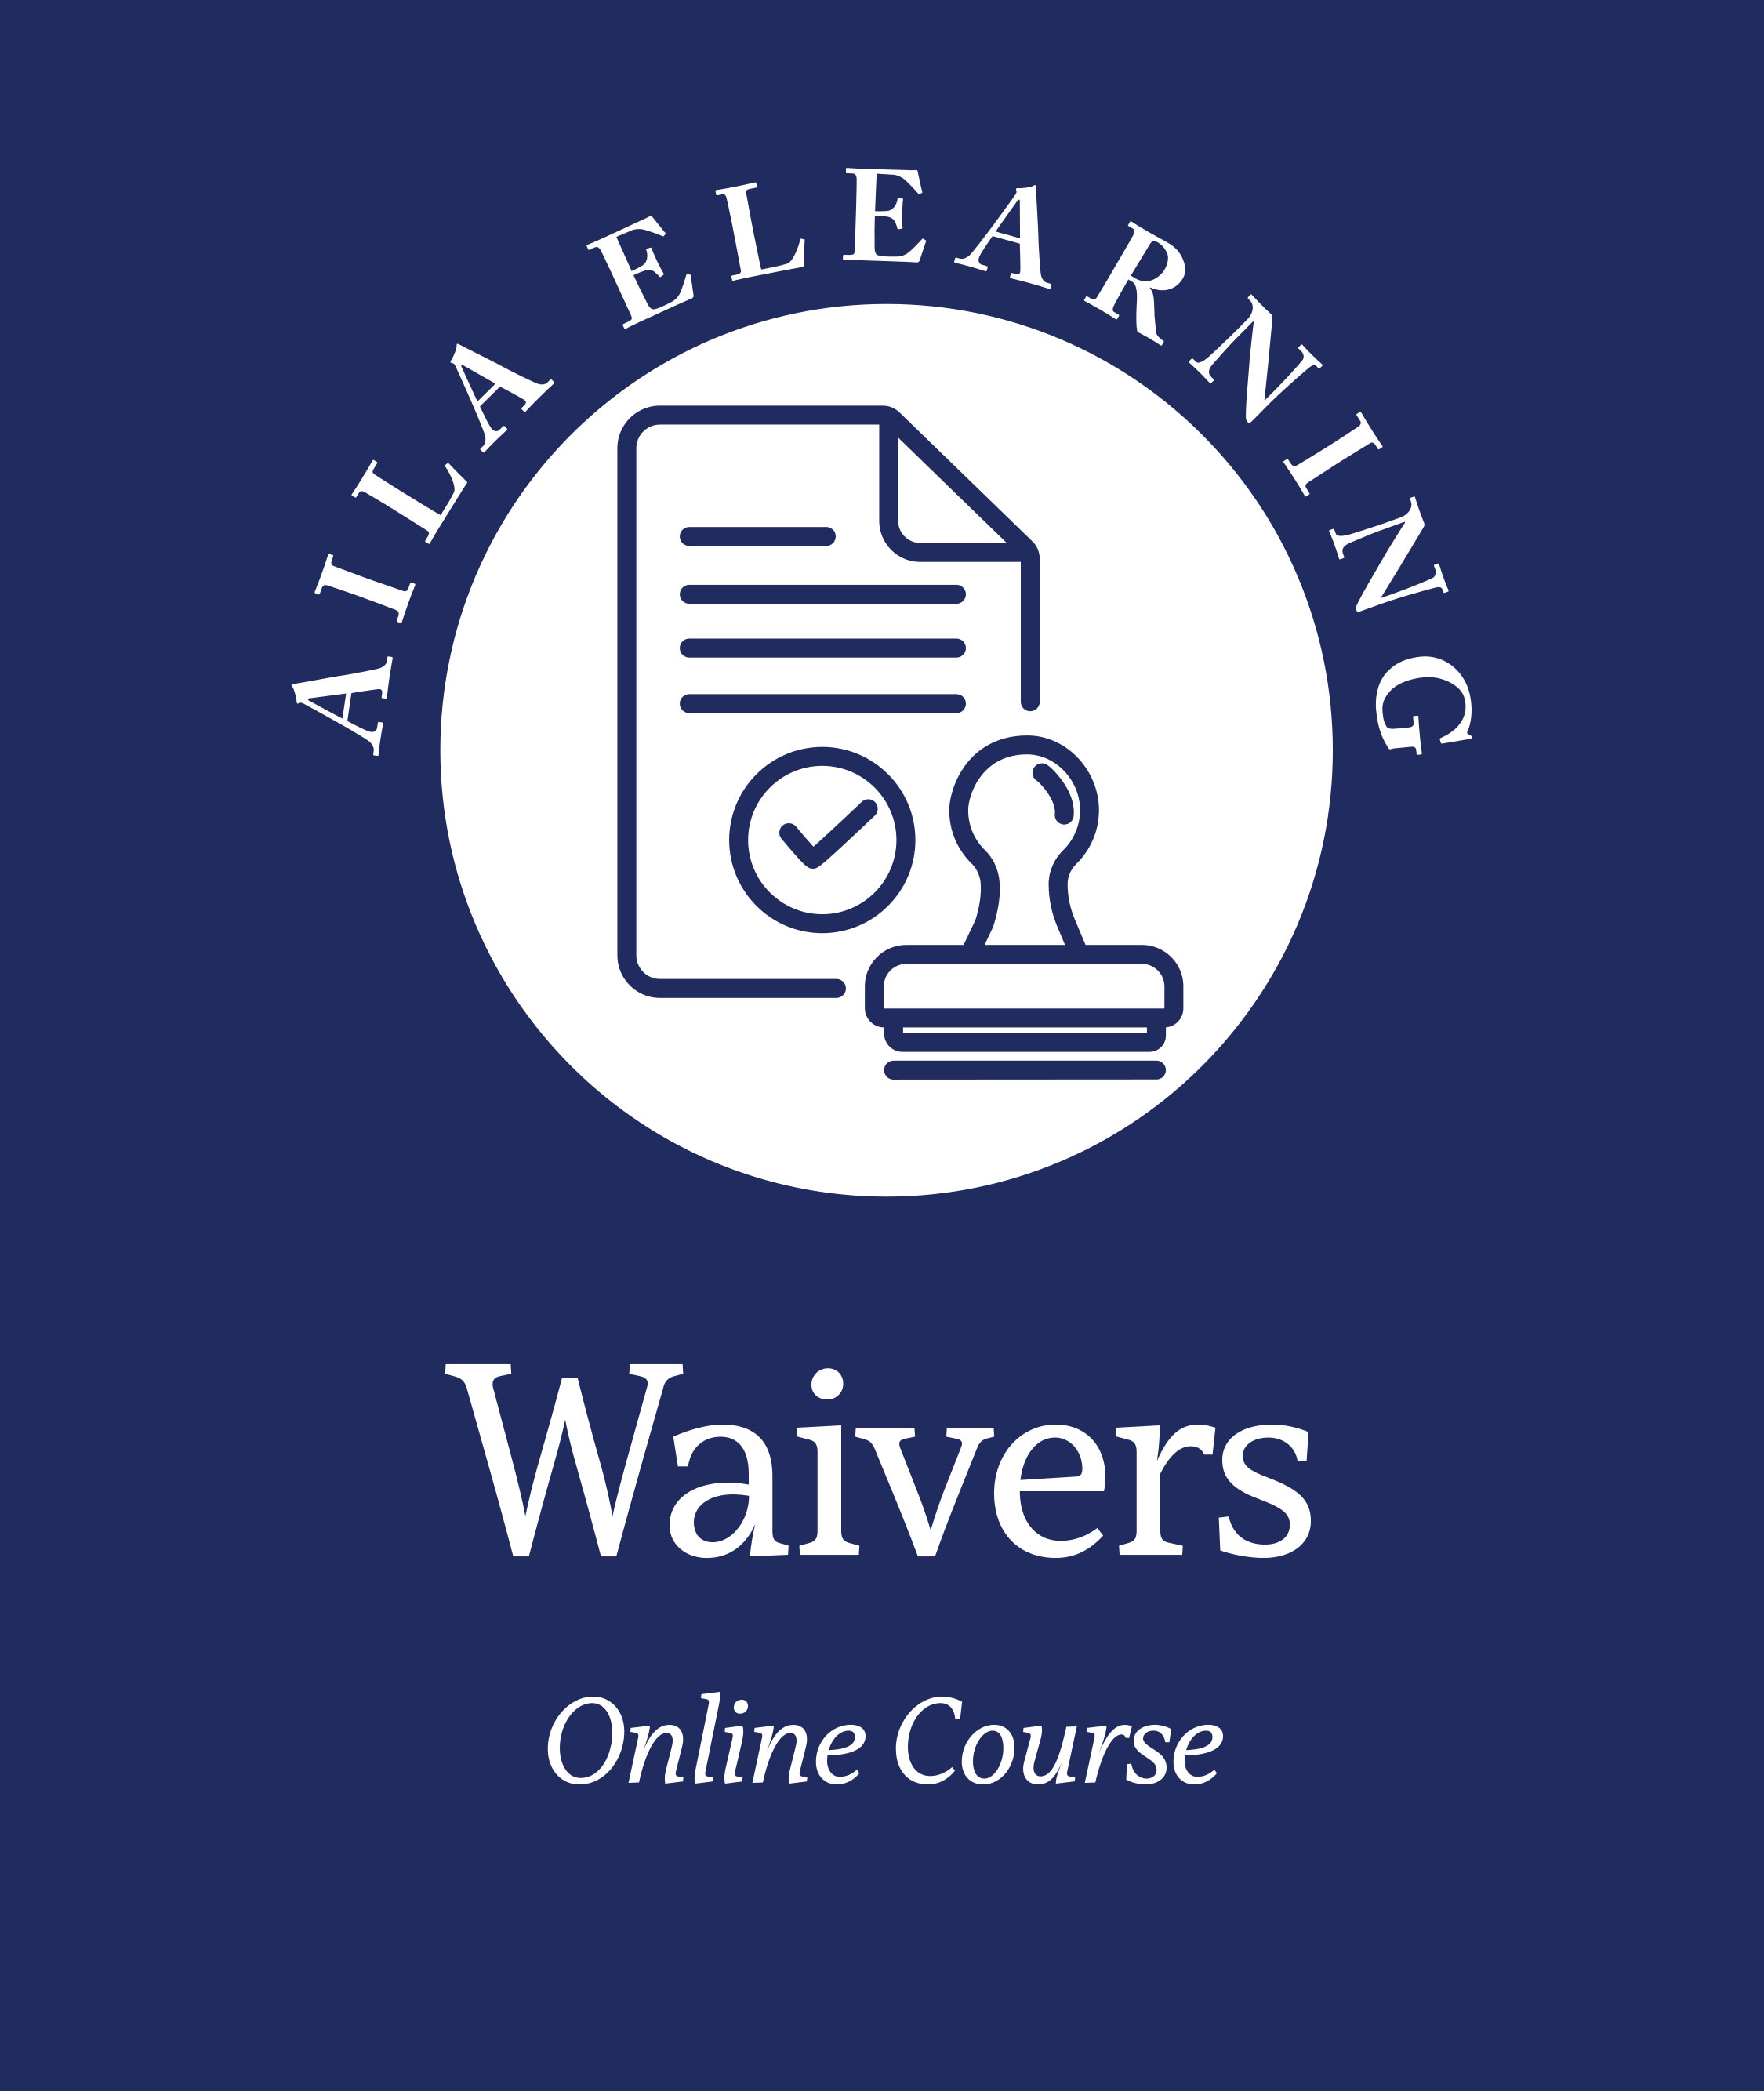 AILA Waivers Online Course